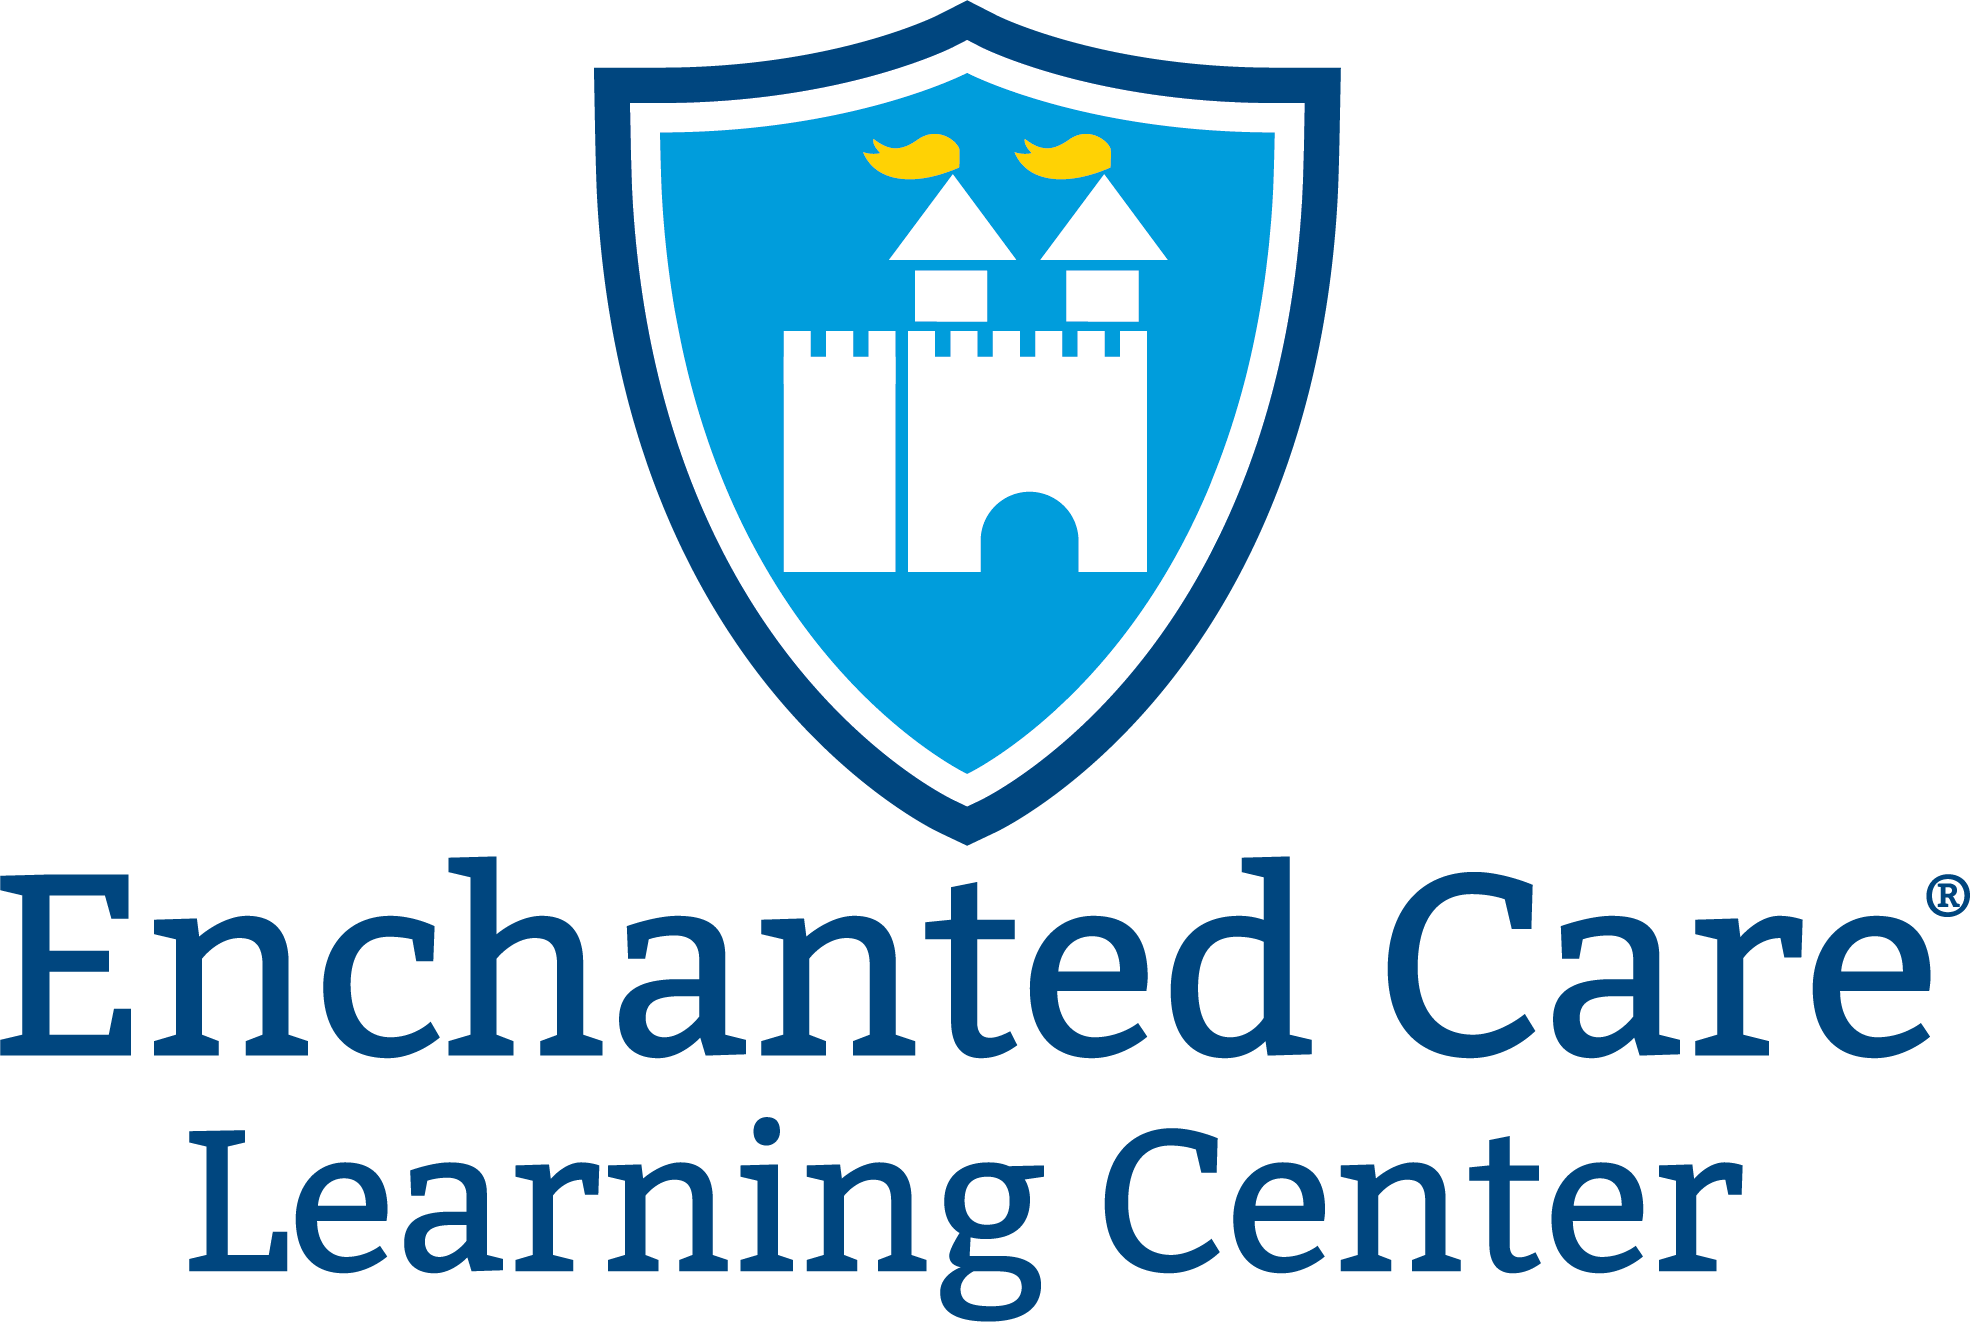 ENCHANTED CARE LEARNING CENTER